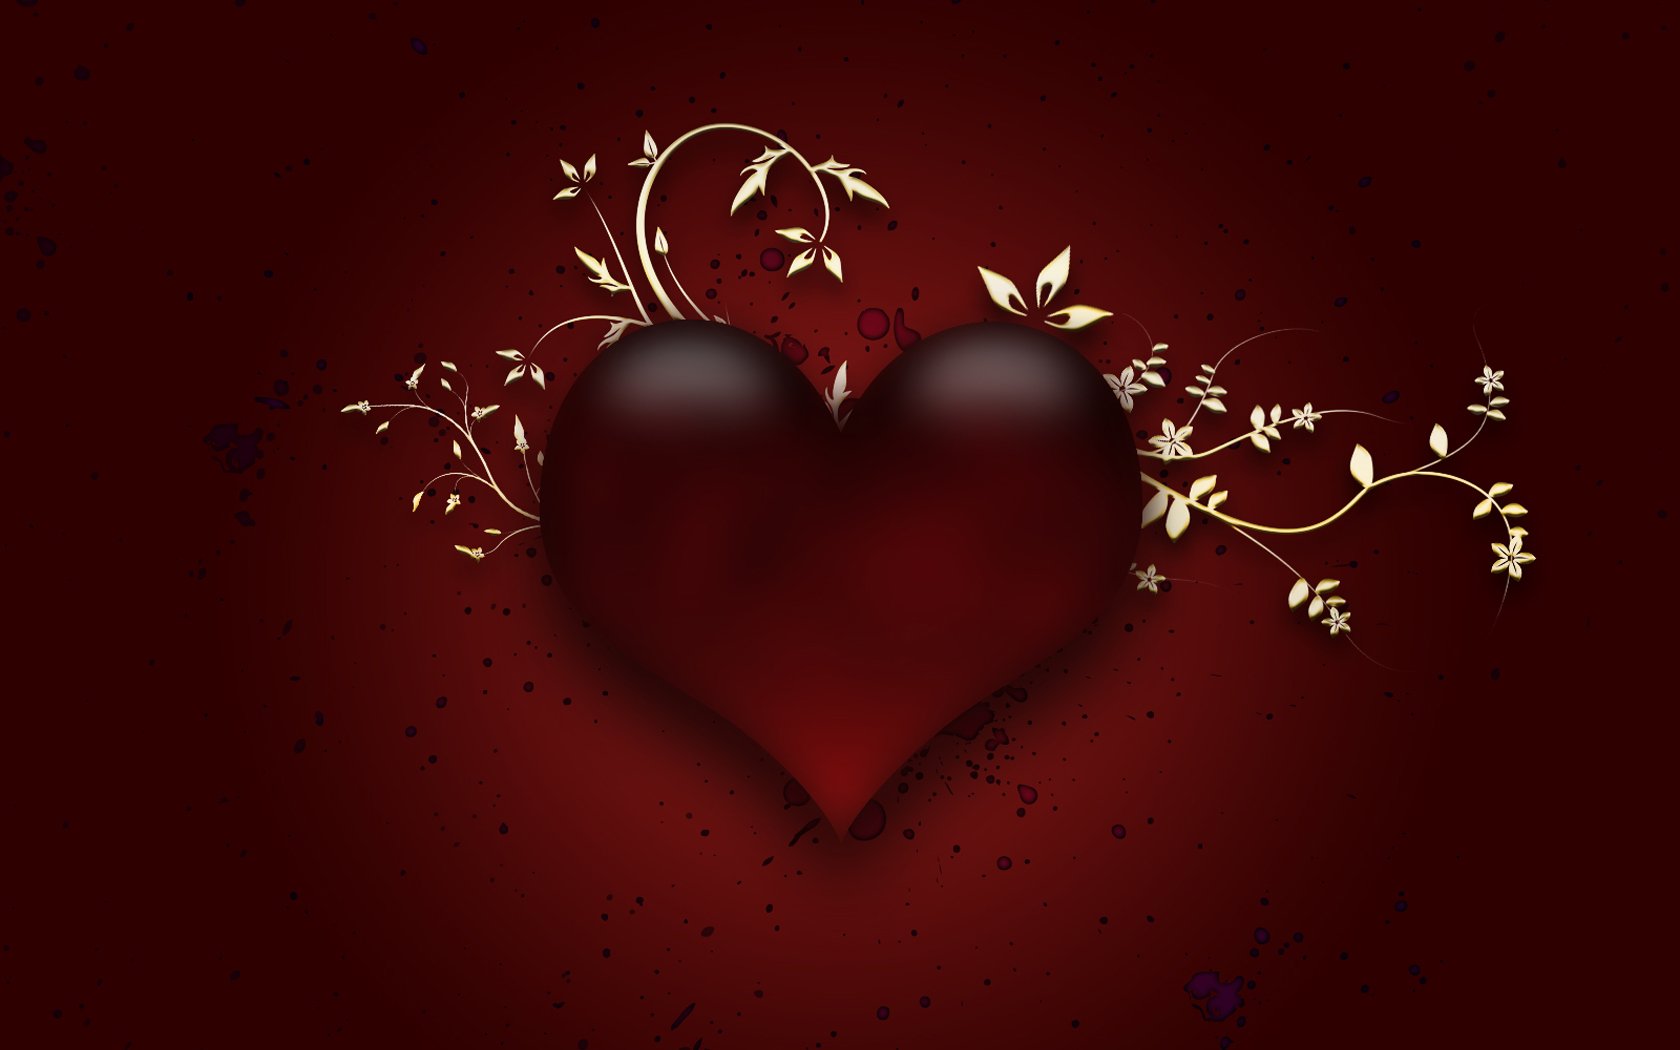 red, Hearts Wallpaper